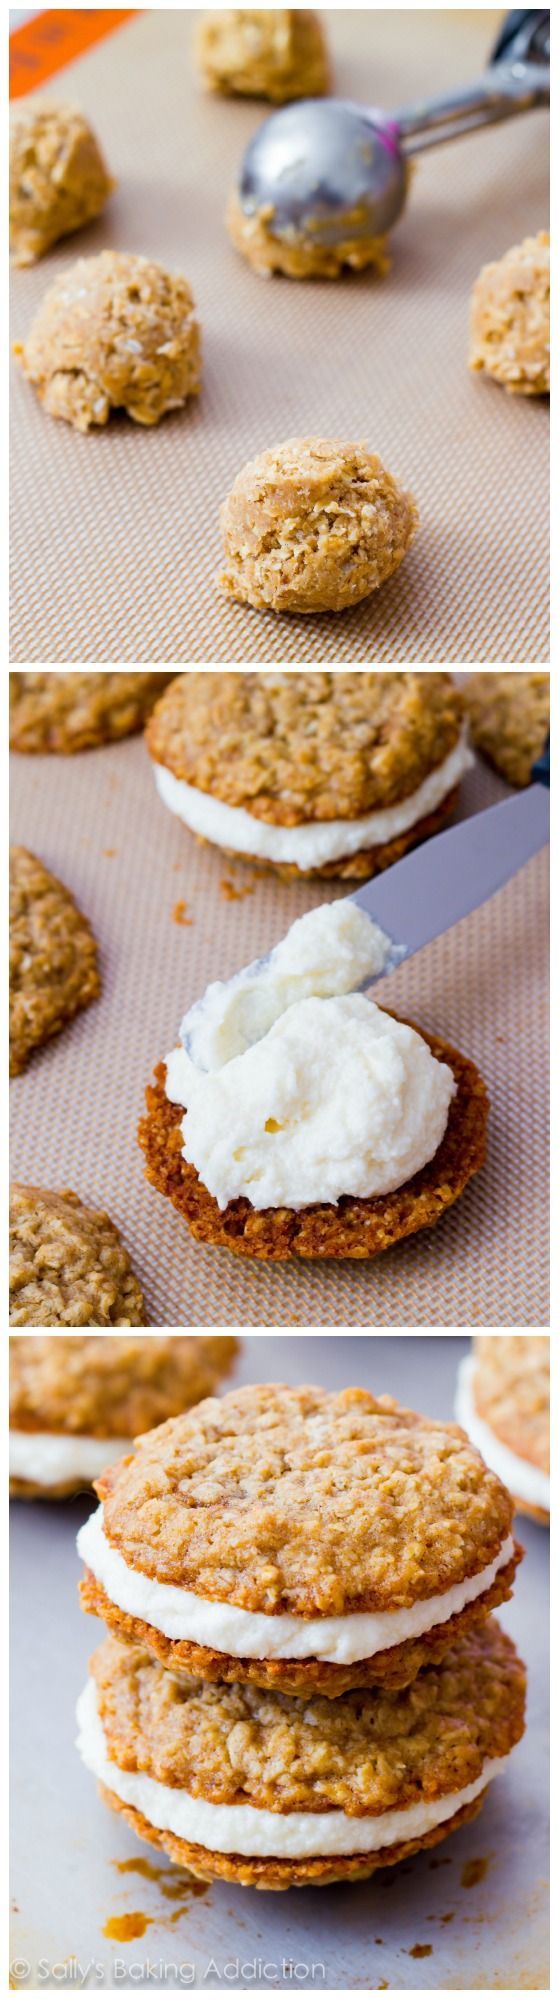 How to make Copycat Little Debbie Oatmeal Creme Pies at home. My readers say these are even better than the original!